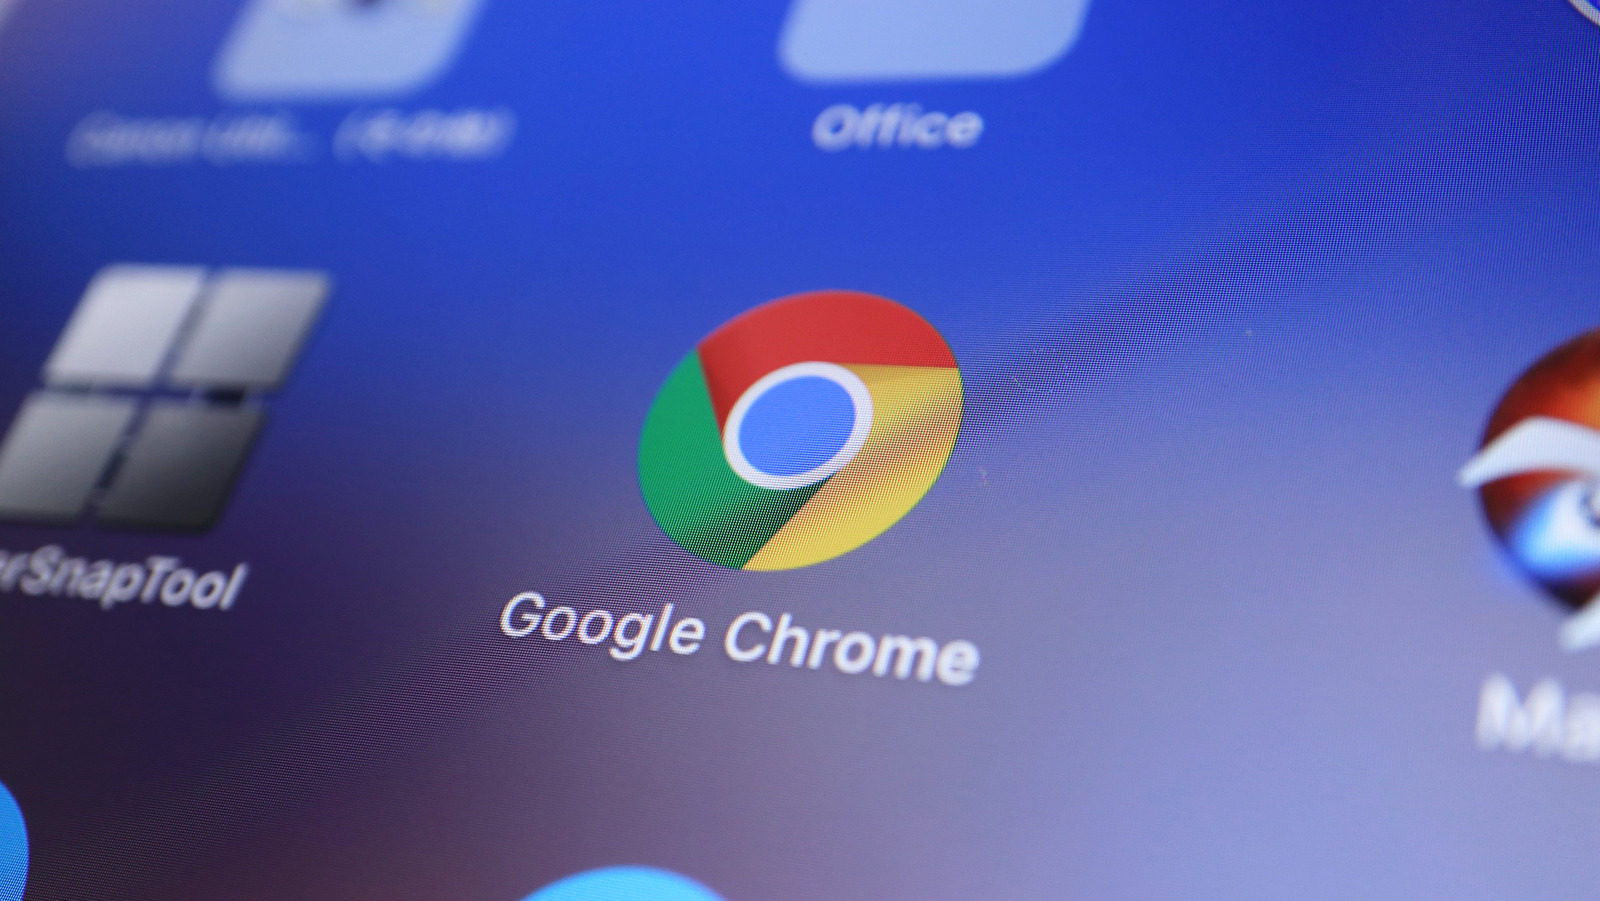 Google Launches New Feature in Chrome Browser that Allows Display of RAM Consumption